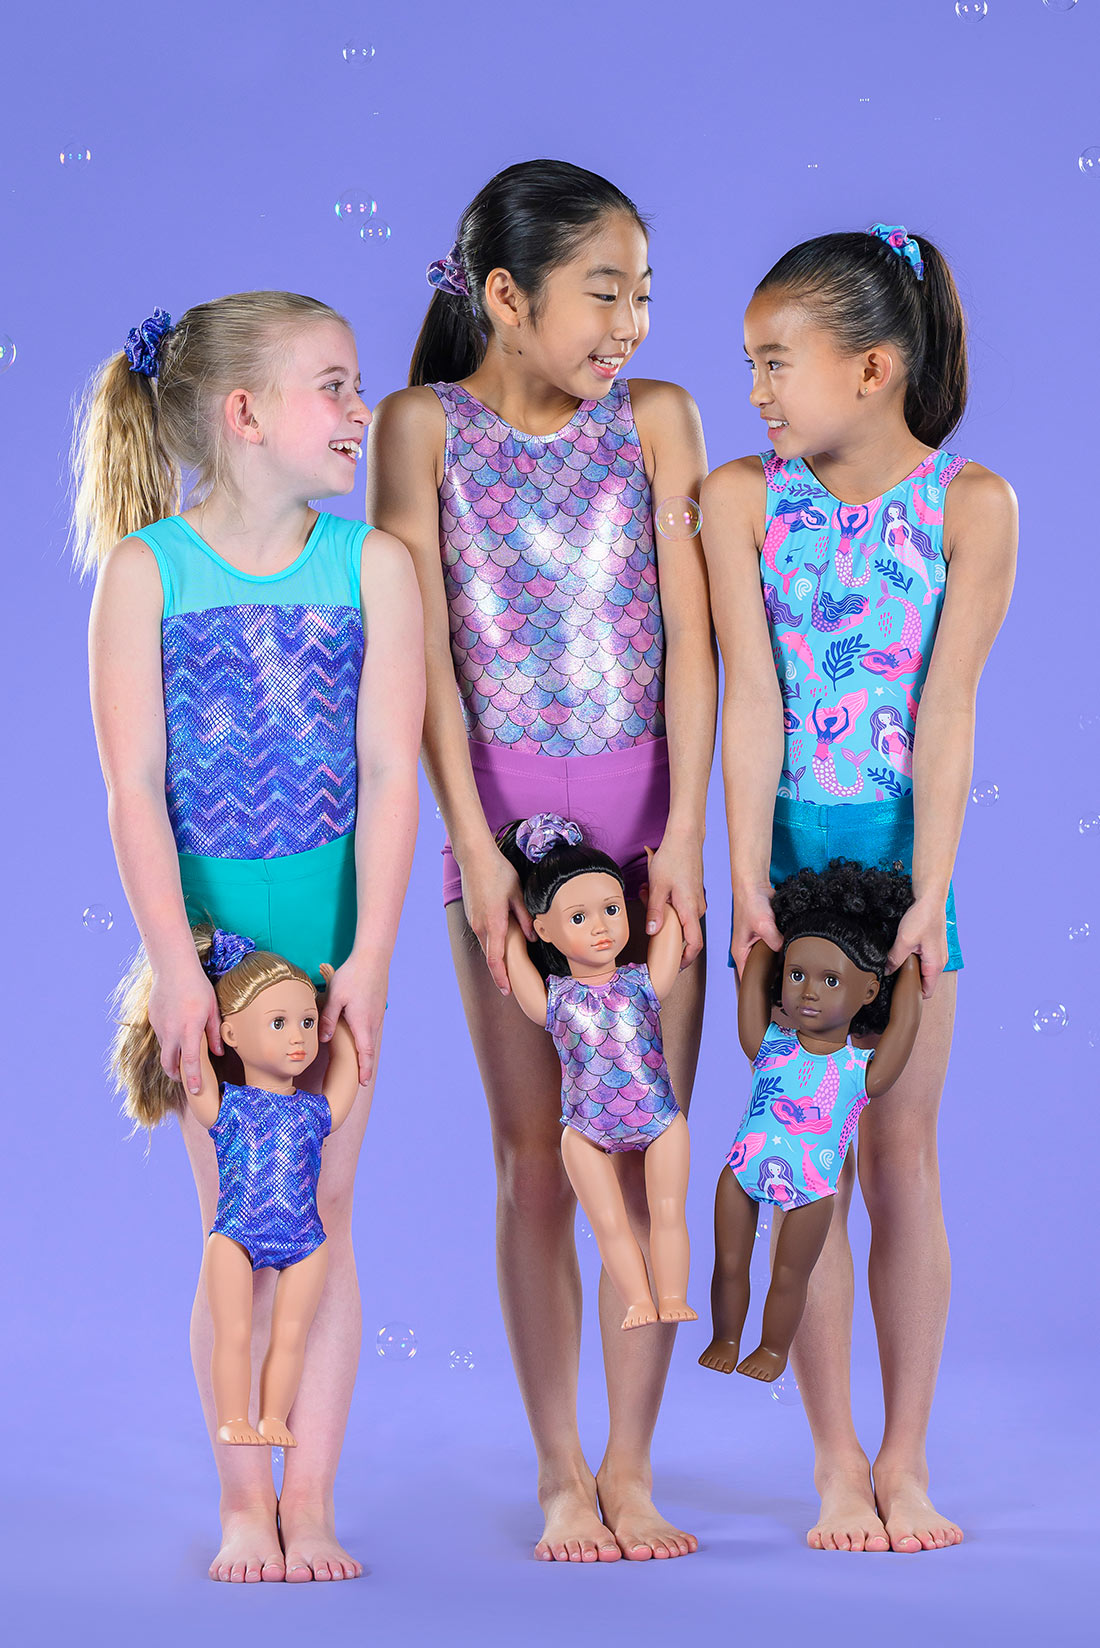 Mermaid inspired gymnastics outfits by Destira, 2024